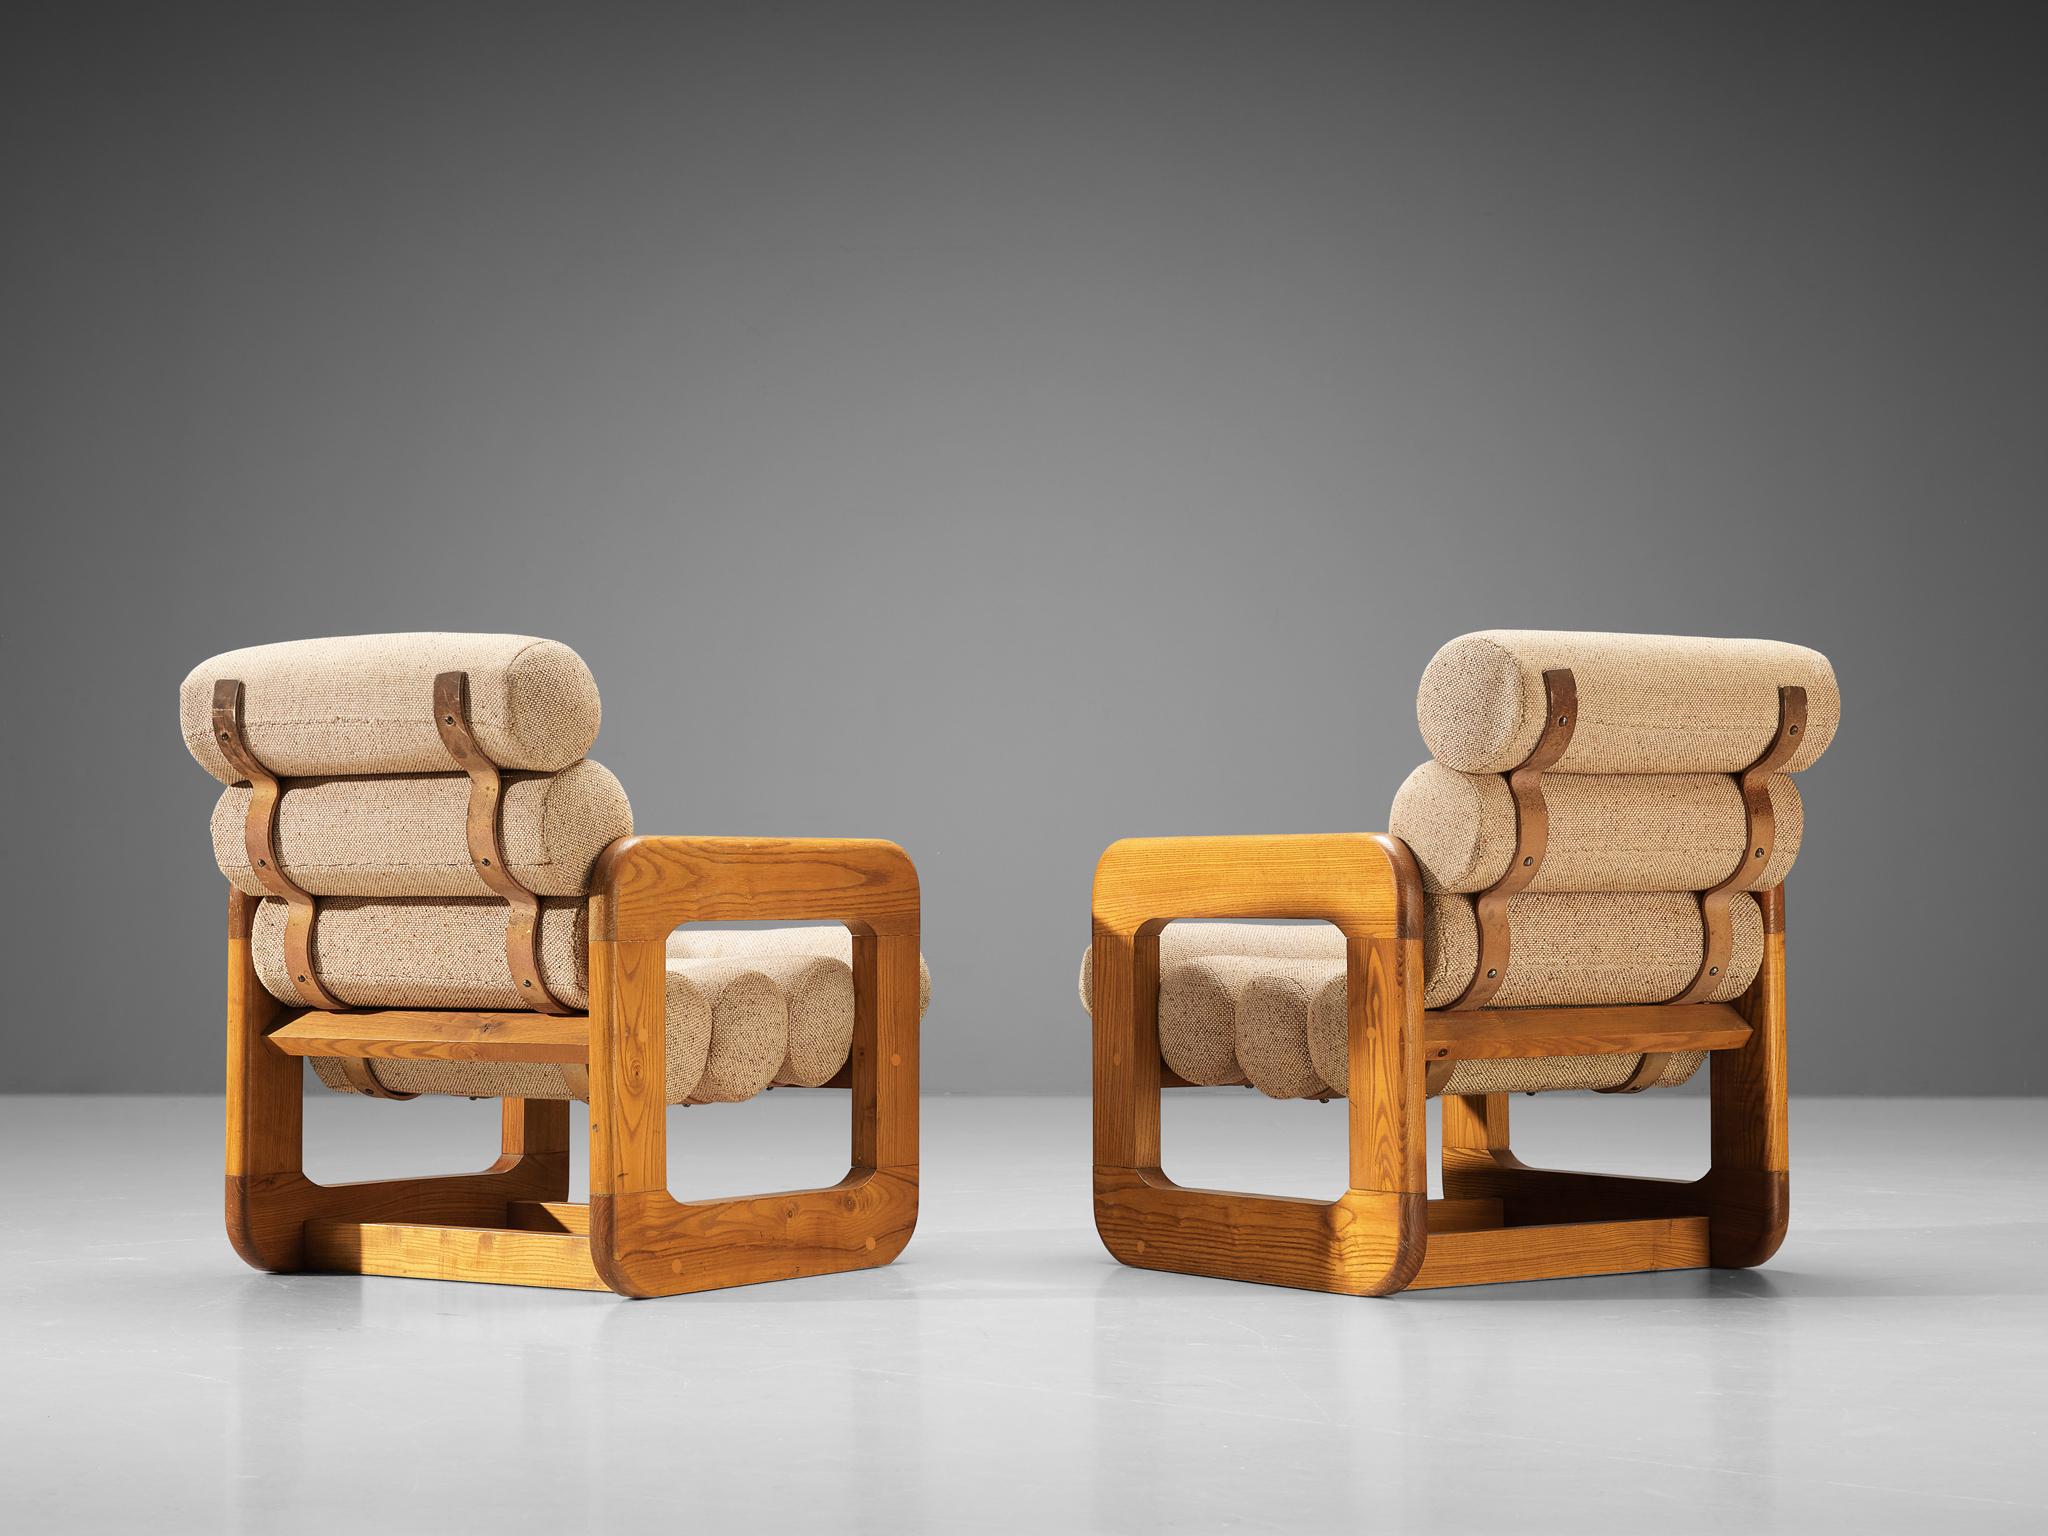 Lounge chairs, ash, fabric, Europe, 1970s. 

Pair of two unconvential lounge chairs that feature an outstanding design. The seating contains multiple tube-shaped cushions attached together to create a seat and backrest. The repetition of the